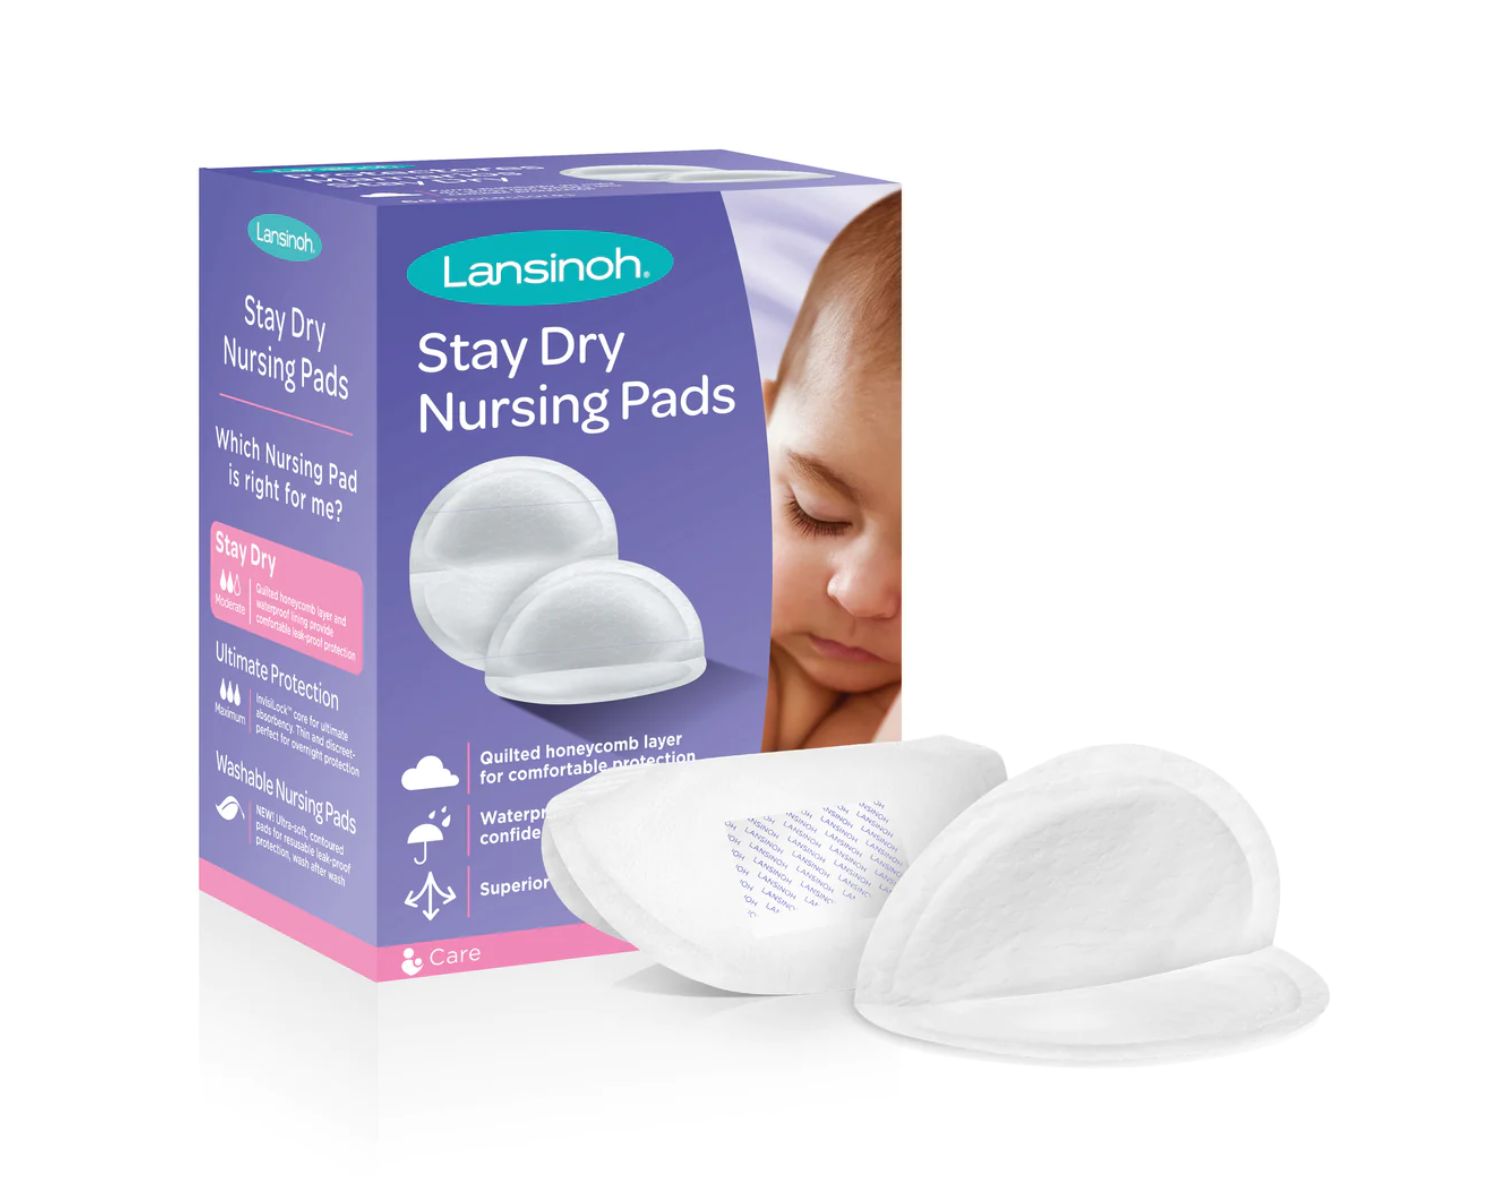 Nursing Pads Review: Find the Best Options for Comfort and Protection